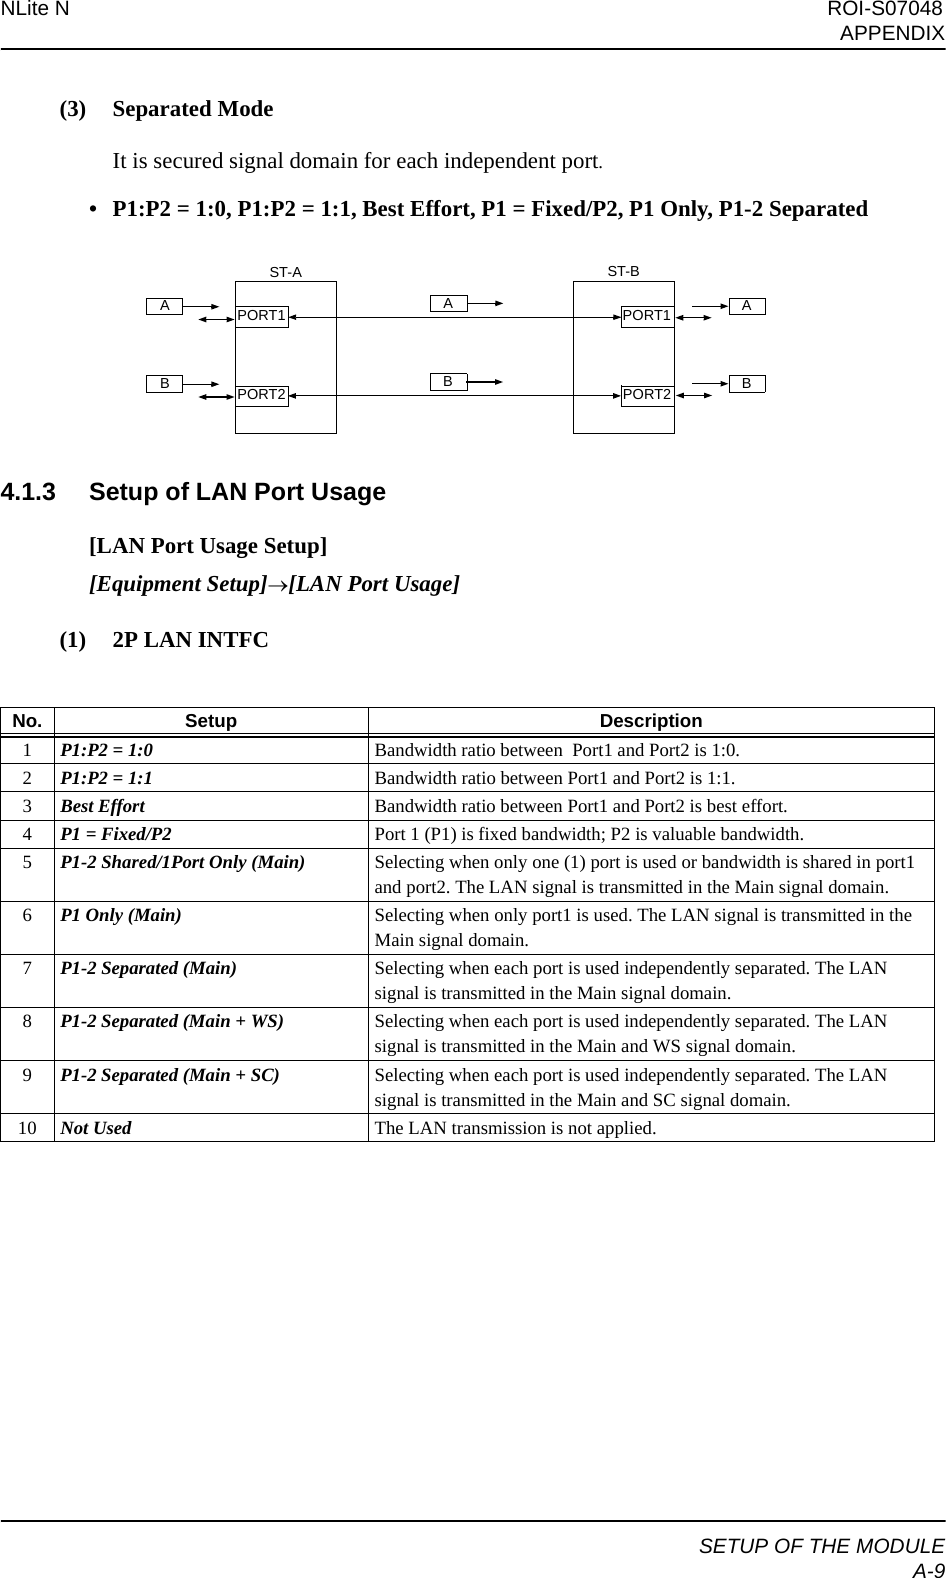 NLite N ROI-S07048APPENDIXSETUP OF THE MODULEA-9(3) Separated ModeIt is secured signal domain for each independent port.• P1:P2 = 1:0, P1:P2 = 1:1, Best Effort, P1 = Fixed/P2, P1 Only, P1-2 Separated4.1.3 Setup of LAN Port Usage[LAN Port Usage Setup][Equipment Setup]→[LAN Port Usage](1) 2P LAN INTFCNo. Setup Description1P1:P2 = 1:0 Bandwidth ratio between  Port1 and Port2 is 1:0.2P1:P2 = 1:1 Bandwidth ratio between Port1 and Port2 is 1:1.3Best Effort Bandwidth ratio between Port1 and Port2 is best effort.4P1 = Fixed/P2 Port 1 (P1) is fixed bandwidth; P2 is valuable bandwidth.5P1-2 Shared/1Port Only (Main) Selecting when only one (1) port is used or bandwidth is shared in port1 and port2. The LAN signal is transmitted in the Main signal domain.6P1 Only (Main) Selecting when only port1 is used. The LAN signal is transmitted in the Main signal domain.7P1-2 Separated (Main) Selecting when each port is used independently separated. The LAN signal is transmitted in the Main signal domain.8P1-2 Separated (Main + WS) Selecting when each port is used independently separated. The LAN signal is transmitted in the Main and WS signal domain.9P1-2 Separated (Main + SC) Selecting when each port is used independently separated. The LAN signal is transmitted in the Main and SC signal domain.10 Not Used The LAN transmission is not applied.PORT2PORT1BAPORT2PORT1BAST-BST-AAB